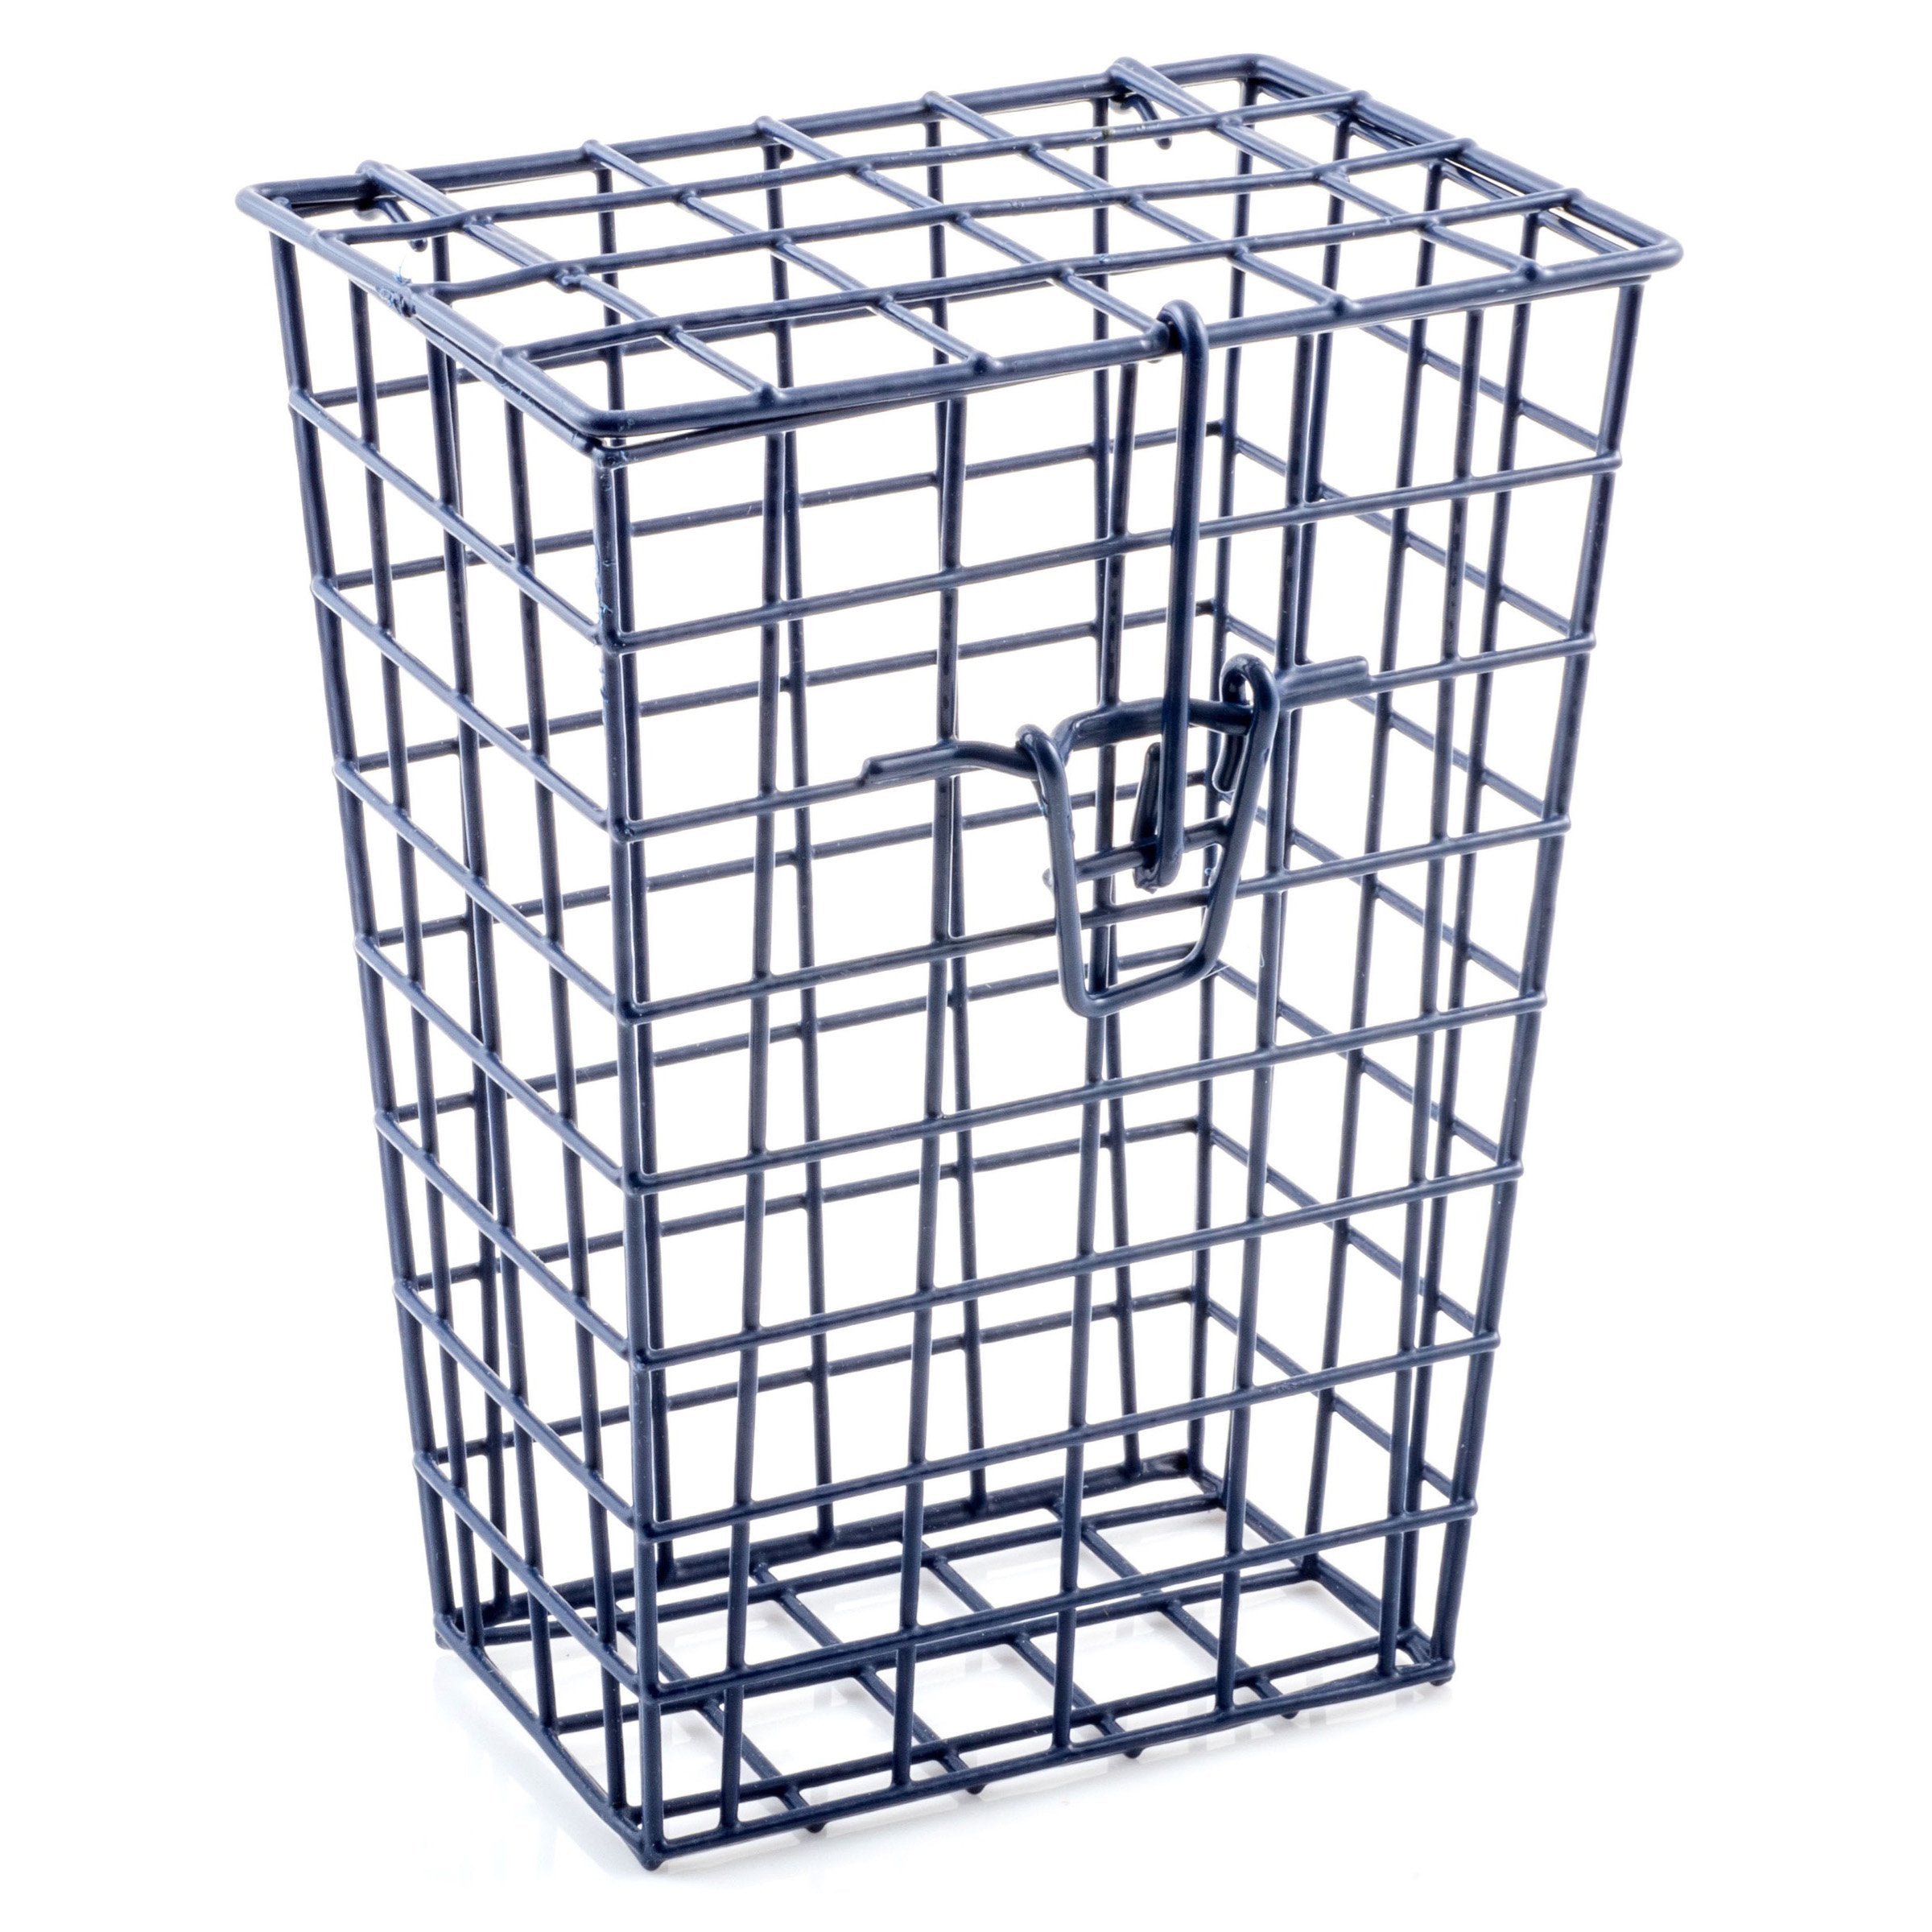 METAL CRAB LOBSTER TRAP SNARE CAGE POT PIER BOAT ROD BEACH SEA FISHING USA  